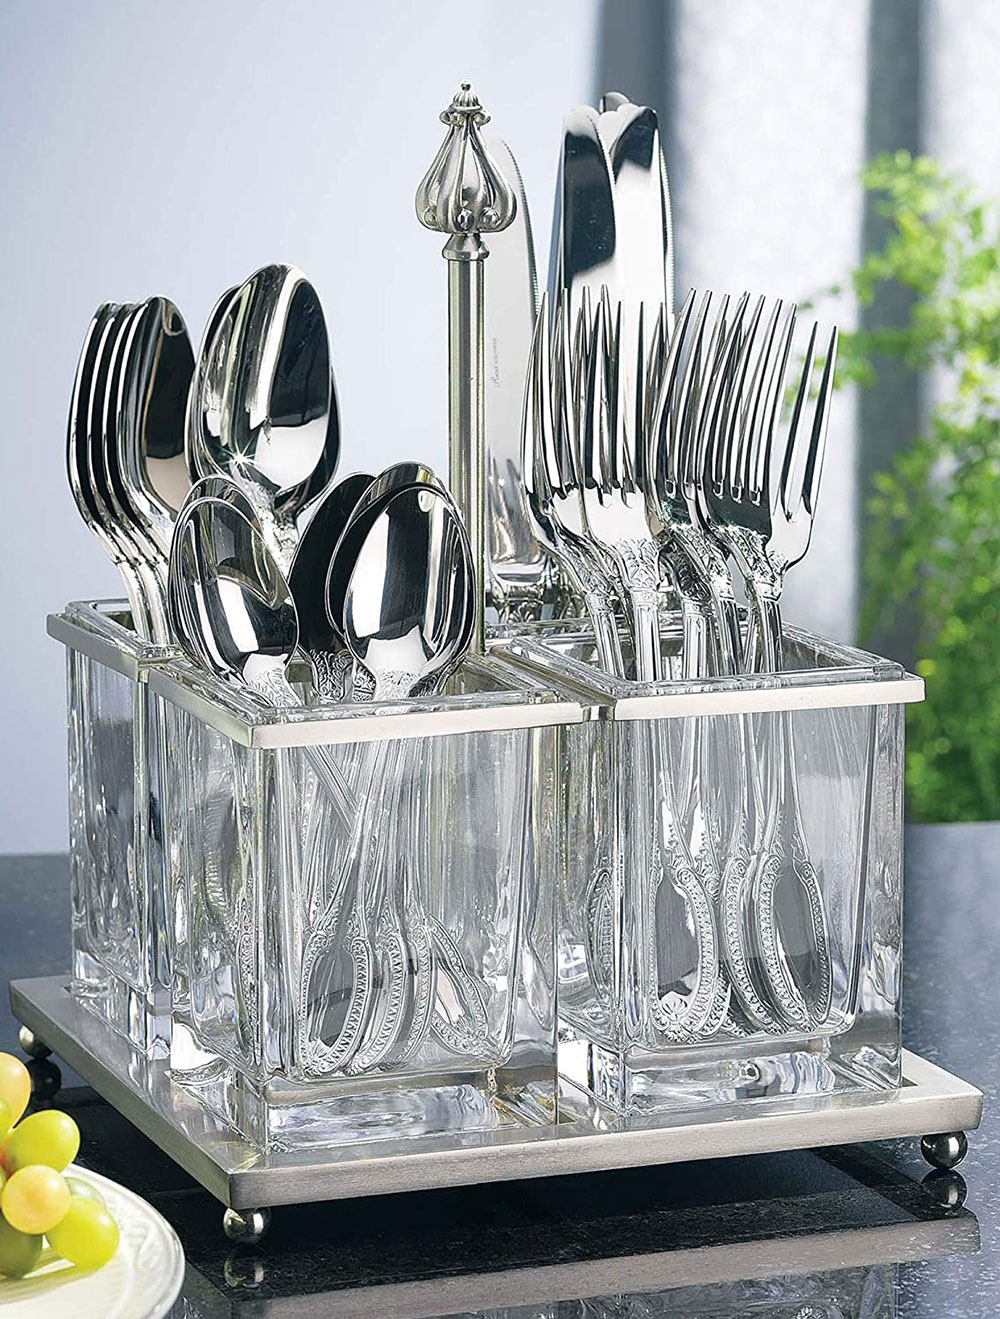 Nickel-plated-and-glass-flatware-caddy What's the best kitchen utensil holder out there?